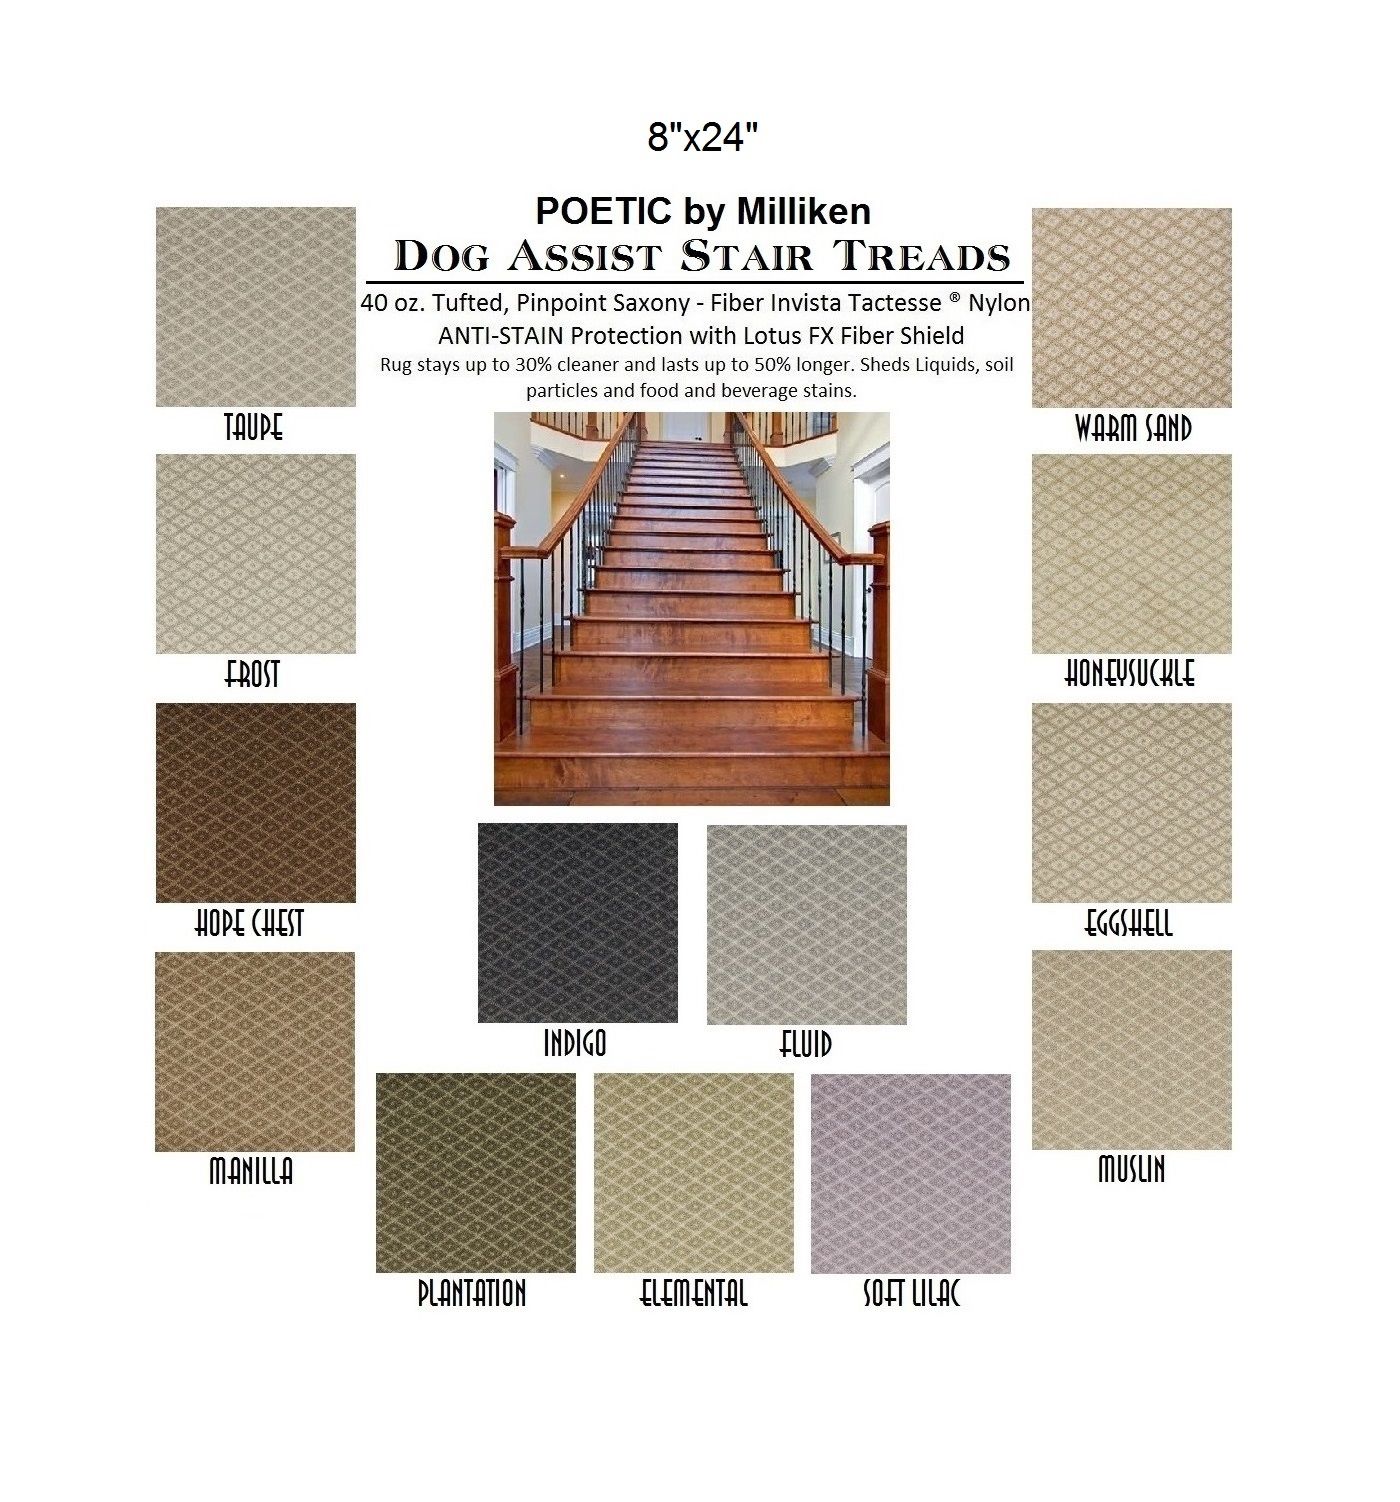 Dog Assist Carpet Stair Treads Regarding Carpet Stair Treads For Dogs (View 13 of 20)